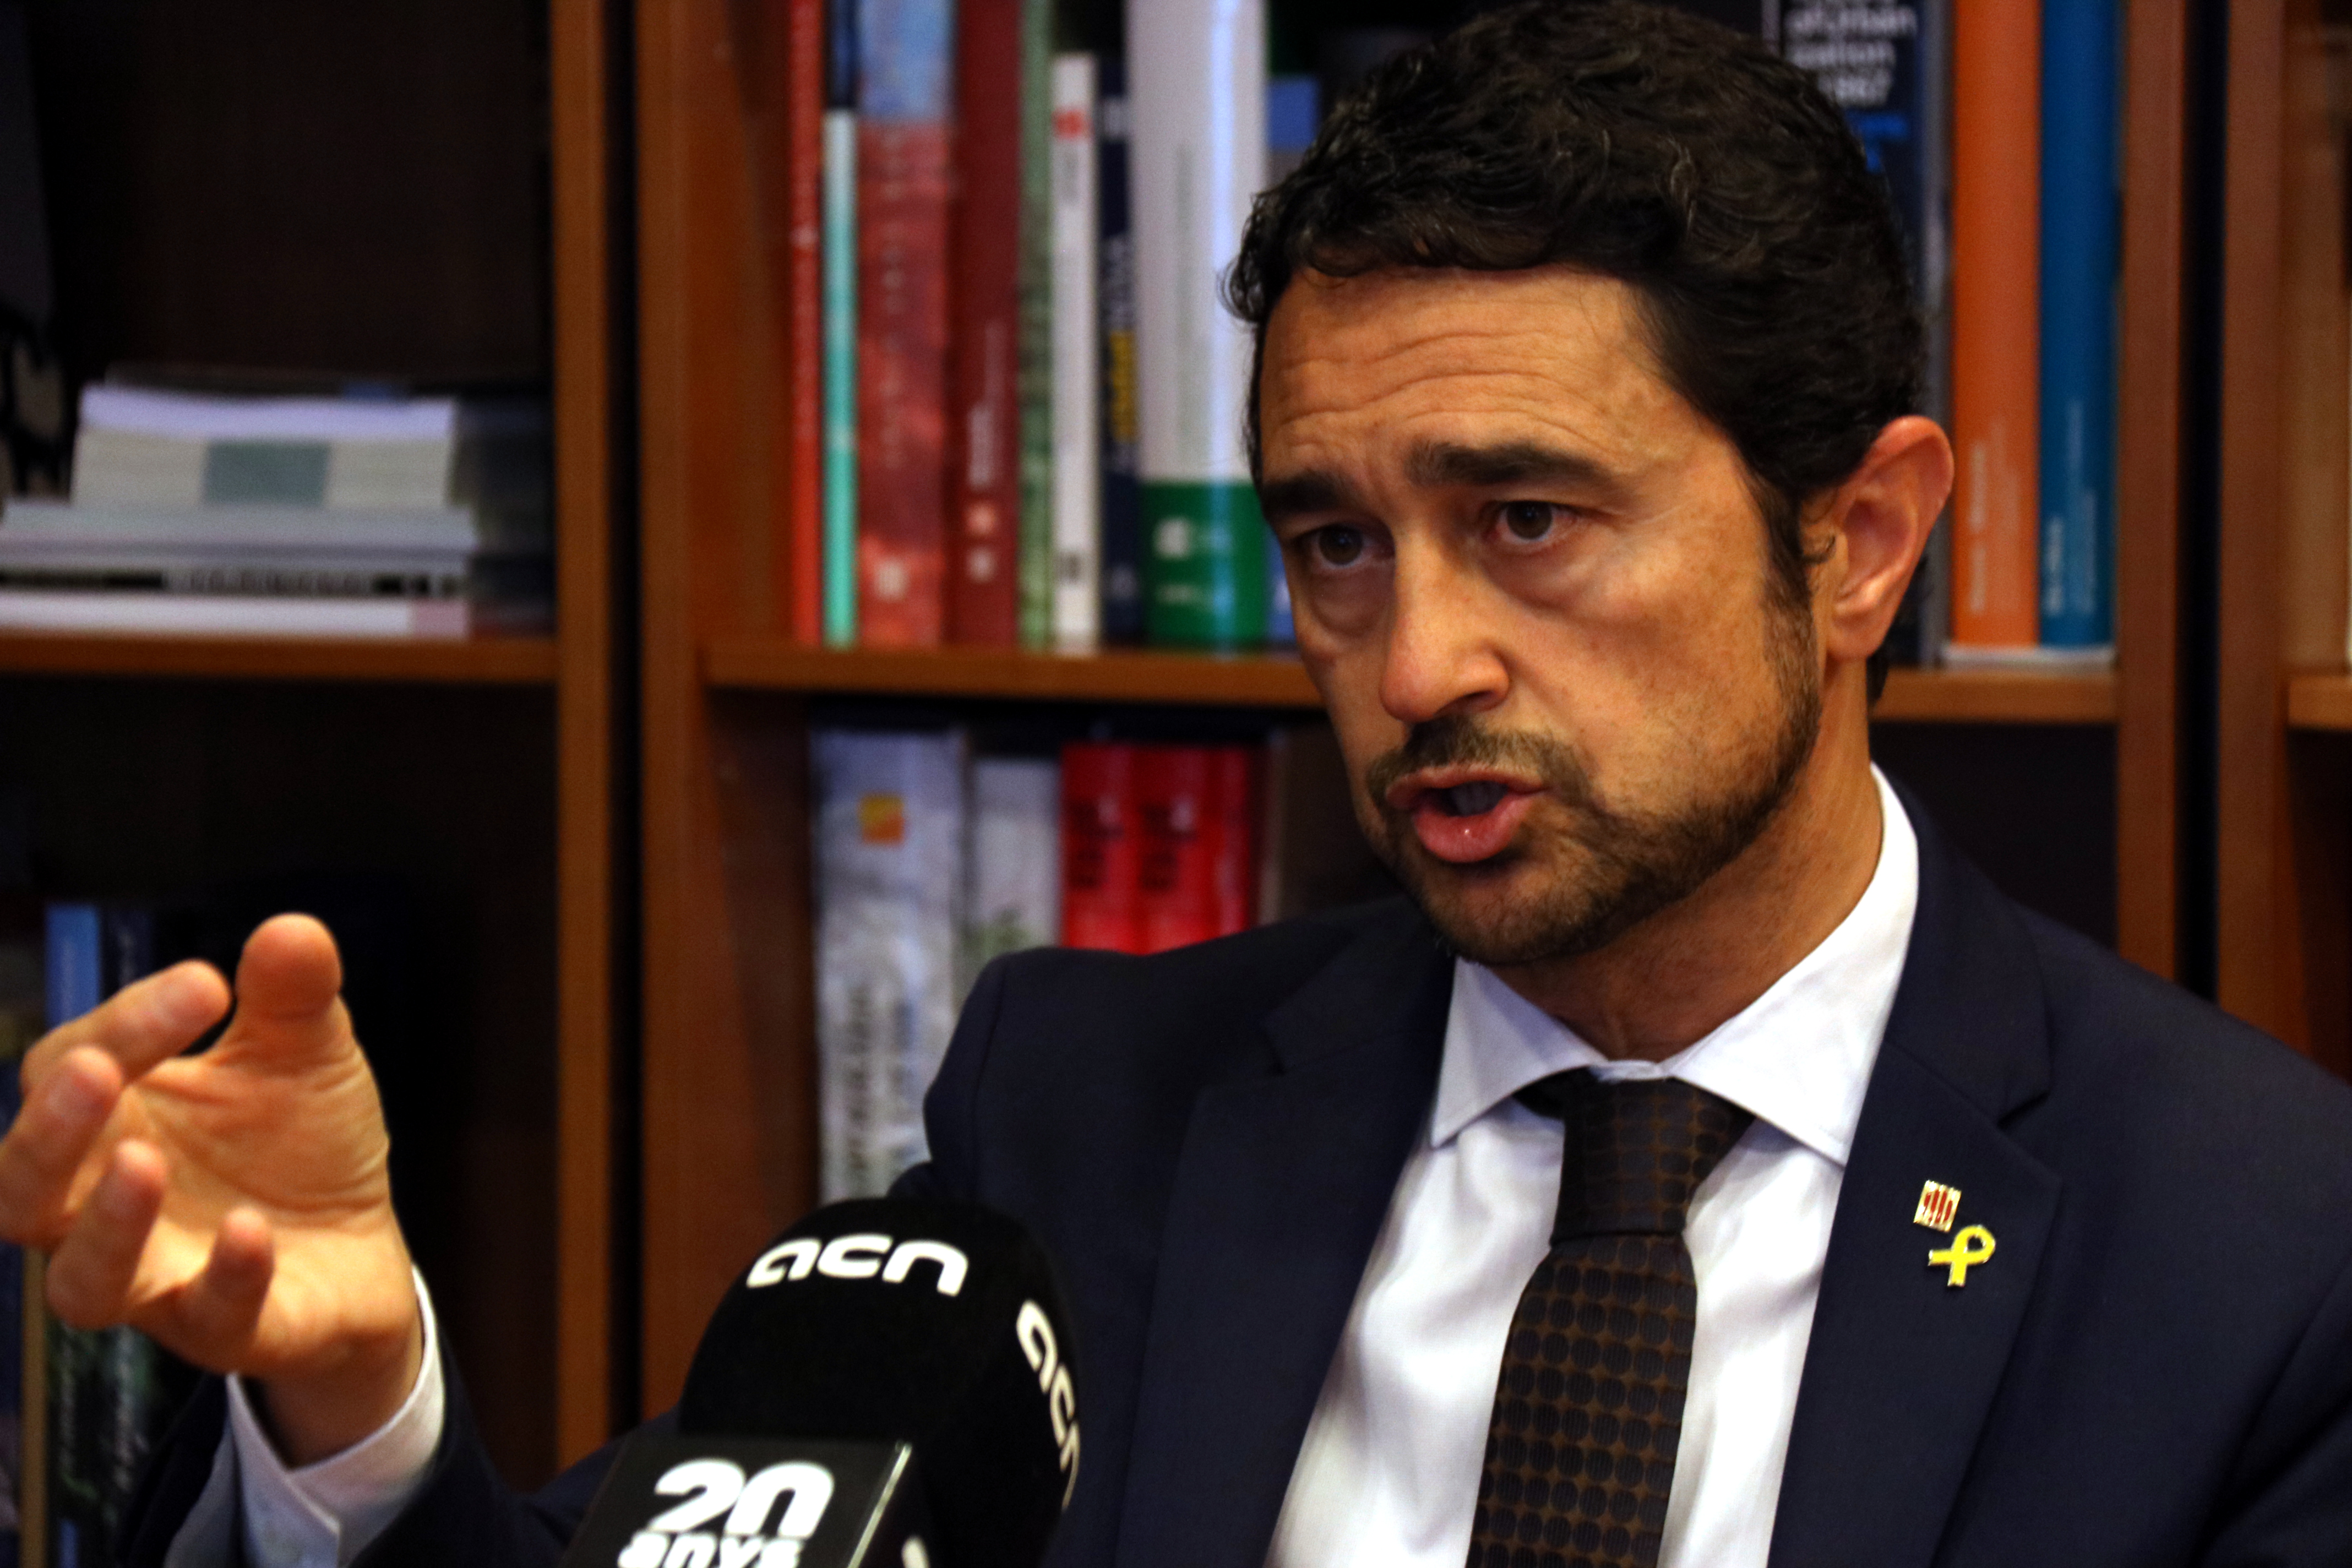 Minister for sustainability and territory Damià Calvet during an interview with ACN on August 3, 2019 (Aina Martí/ACN)